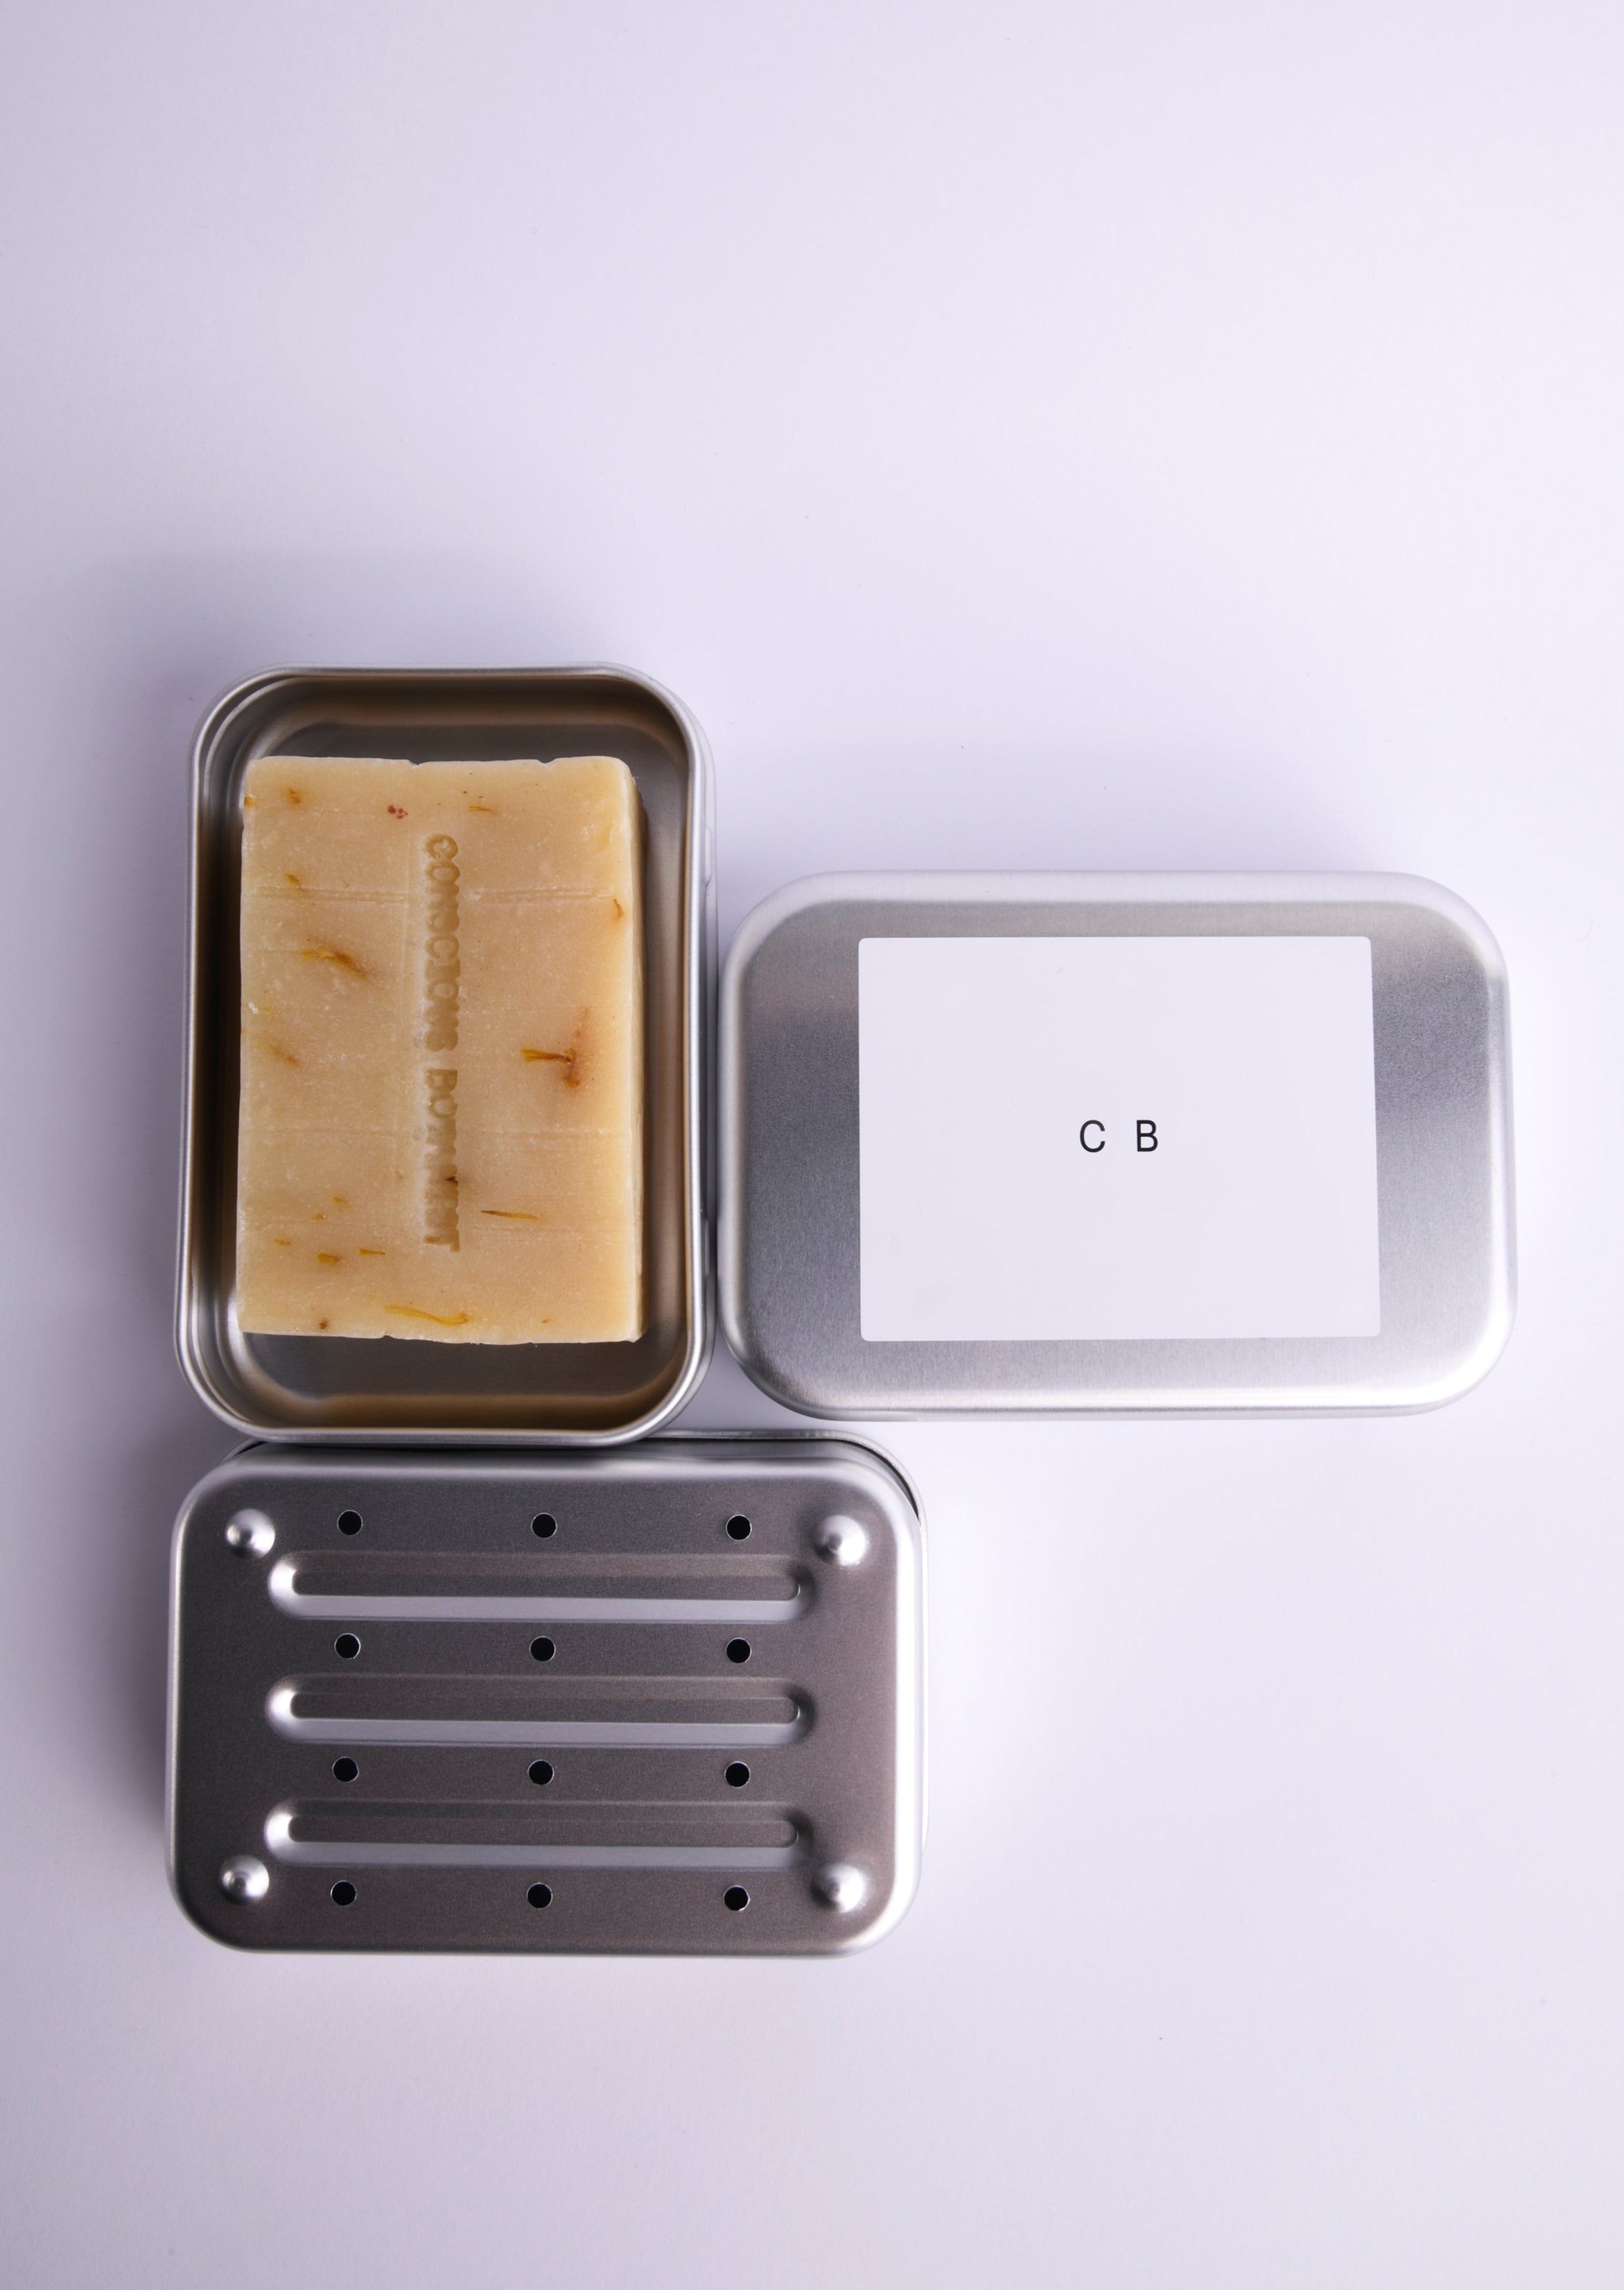 The Hydrating Body Bar & Soap Case